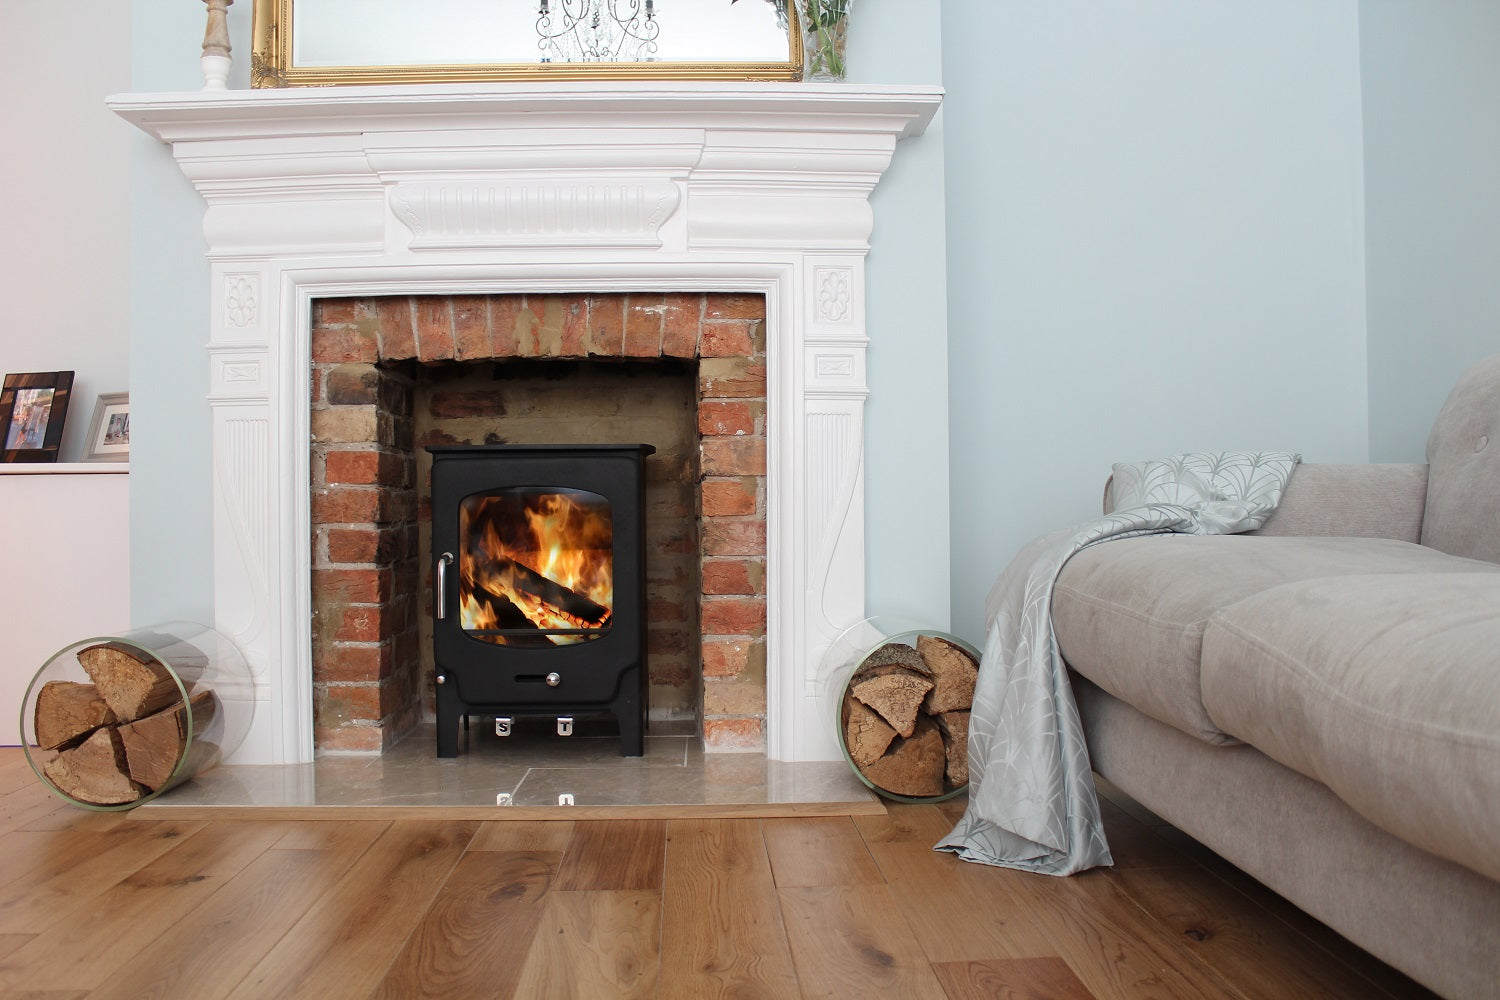 It stlish black mettallic finish and traditional form will enhance any fireplace.